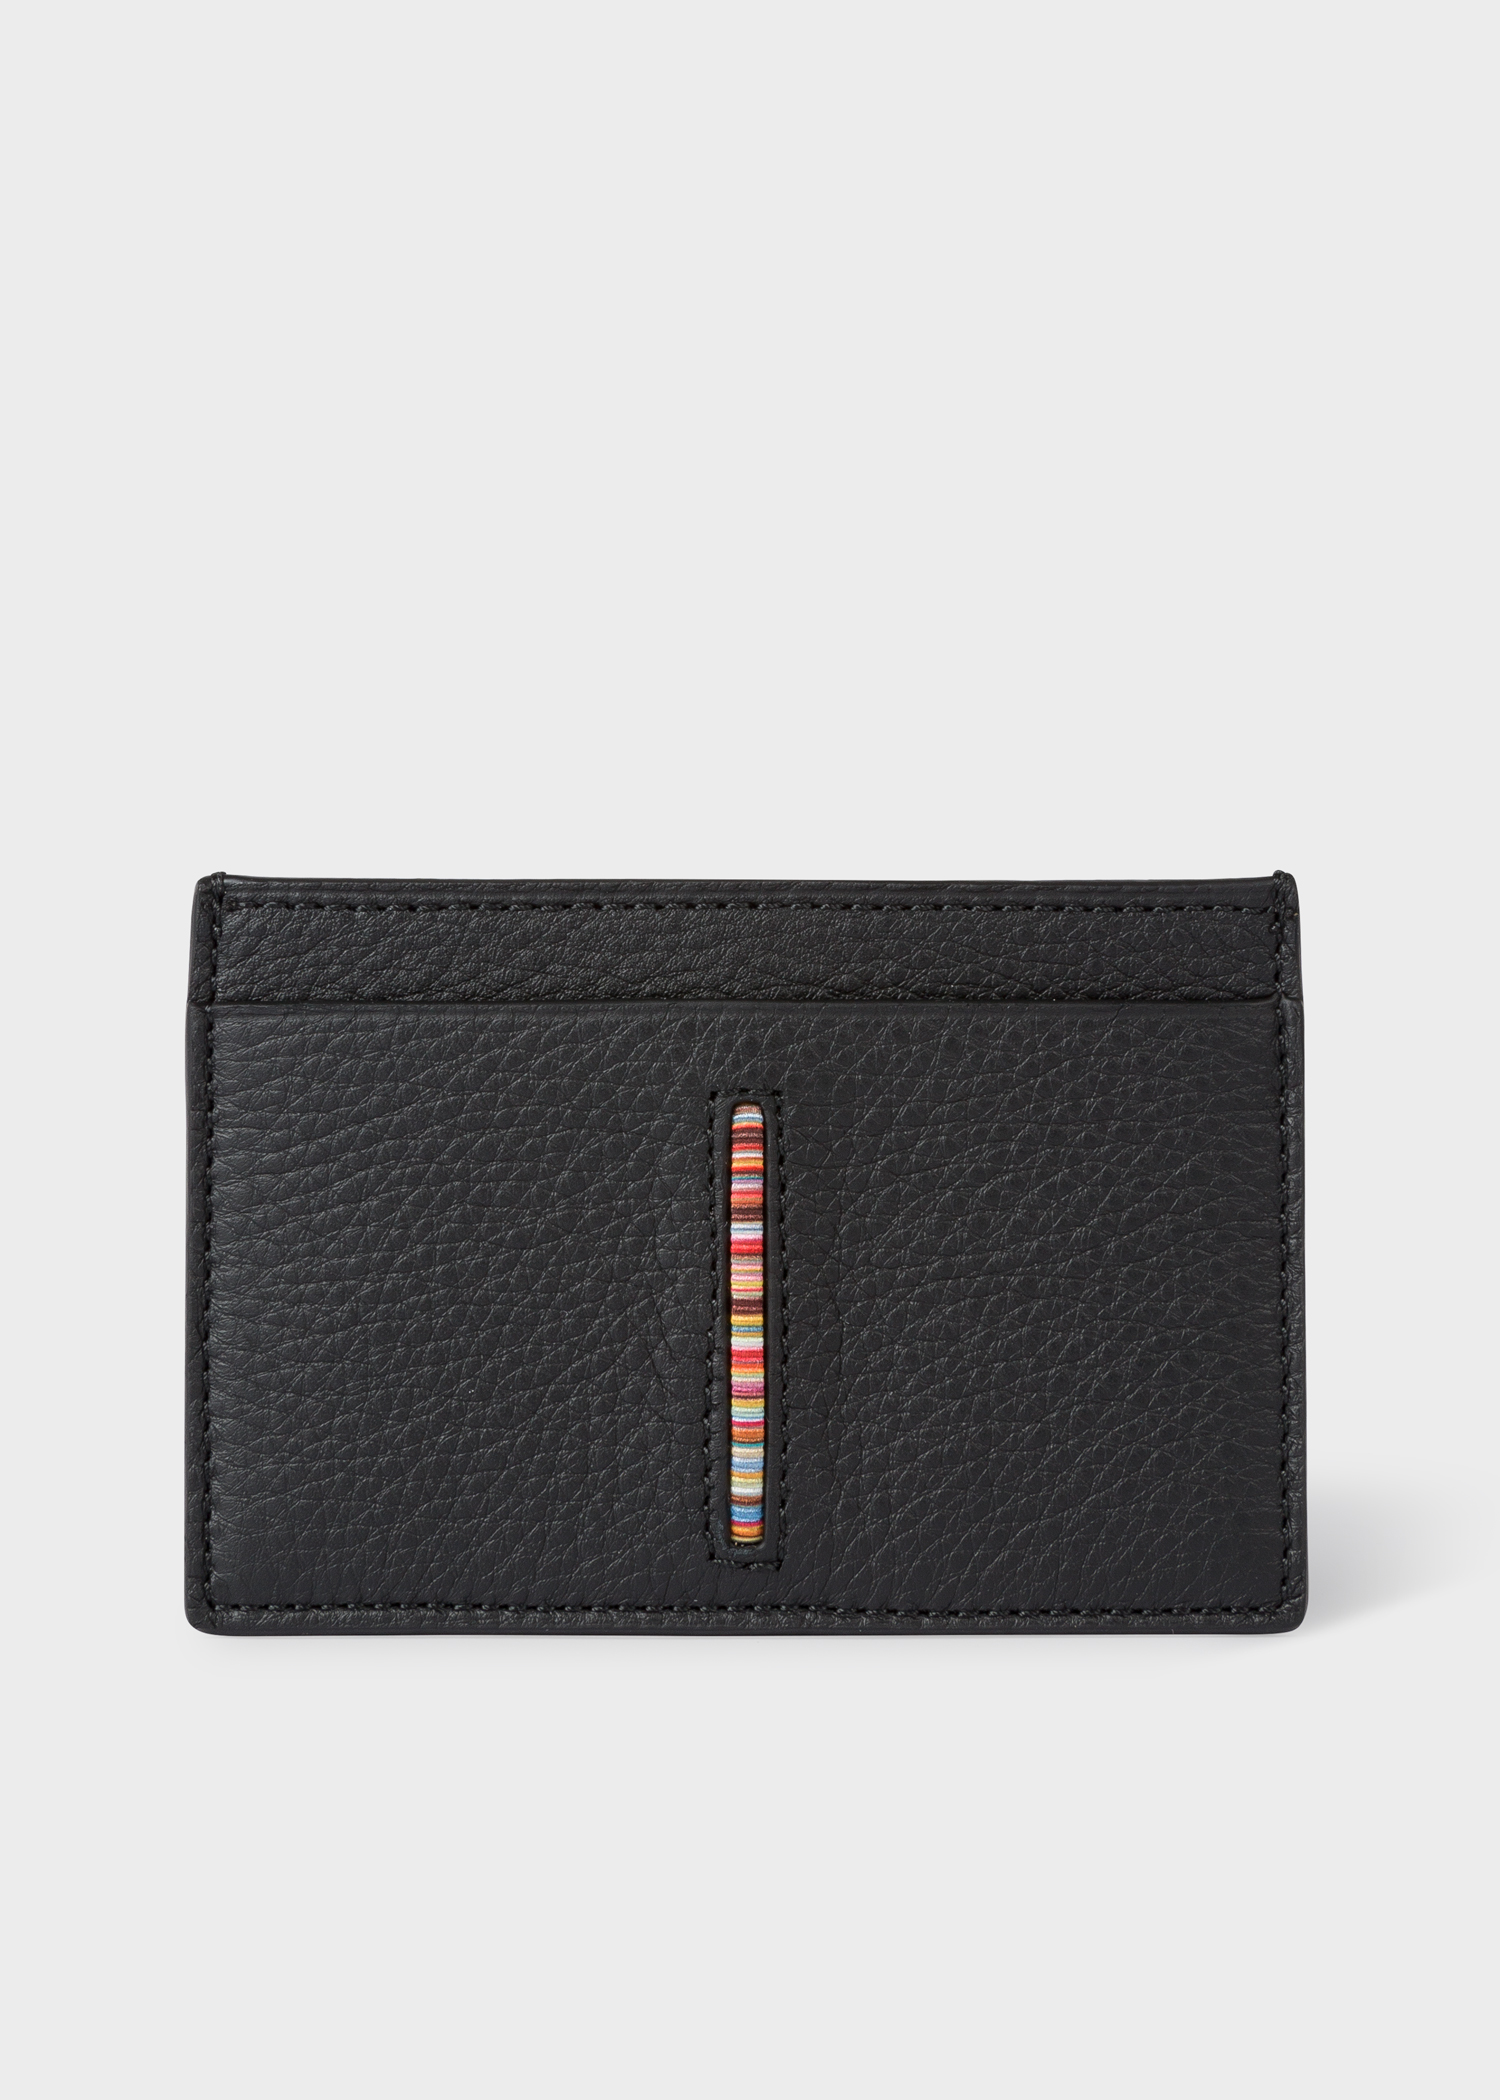 Front view - Men's Black Leather Credit Card Holder Paul Smith